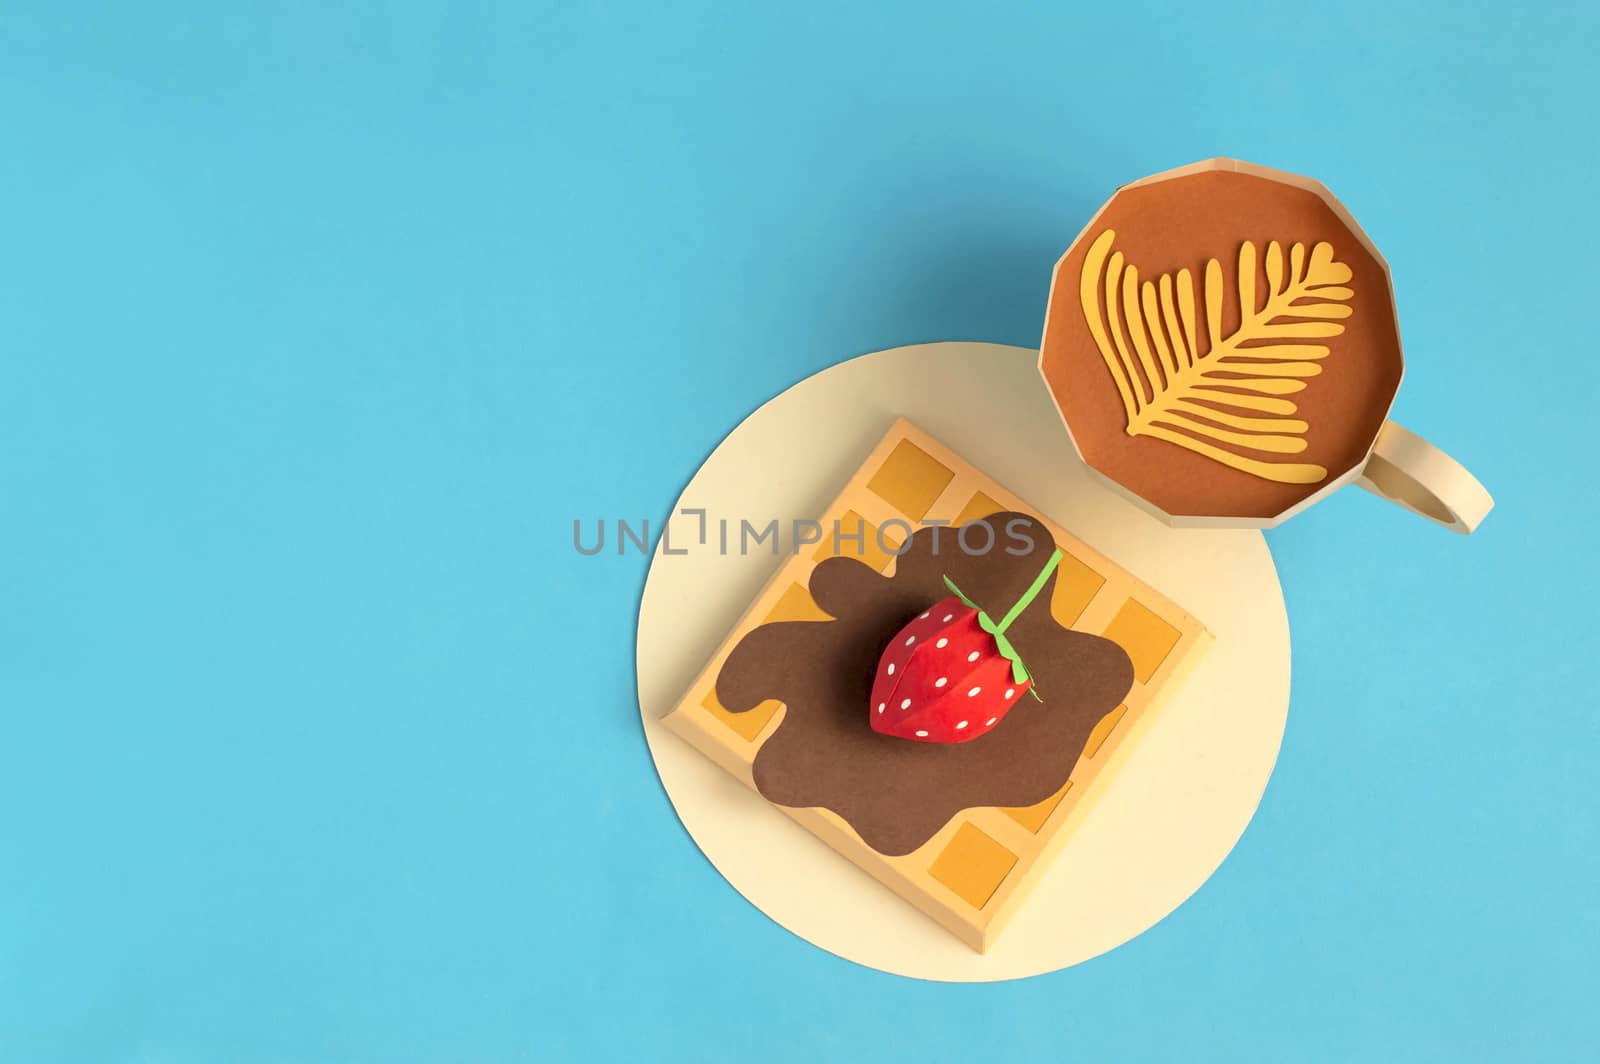 Belgian waffles with chocolate syrup and strawberry, cup of cappuccino made of paper. Real volumetric handmade paper objects. Paper art and craft